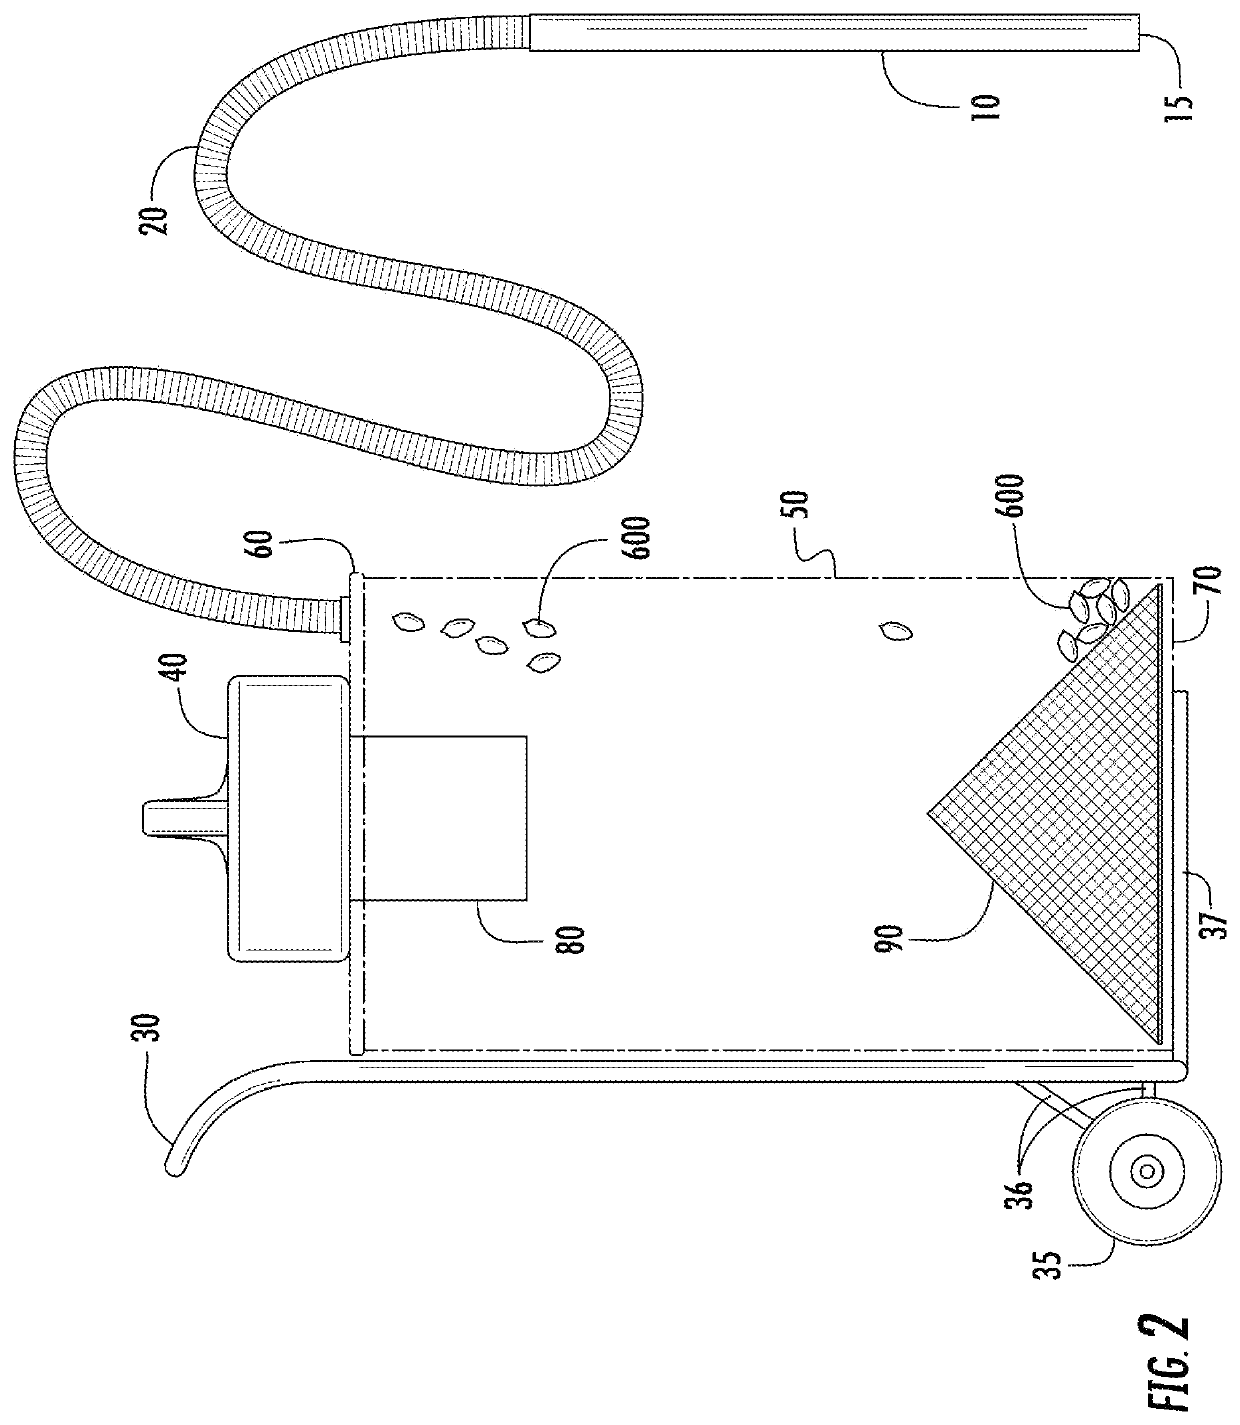 Device and method of use for pecan picking